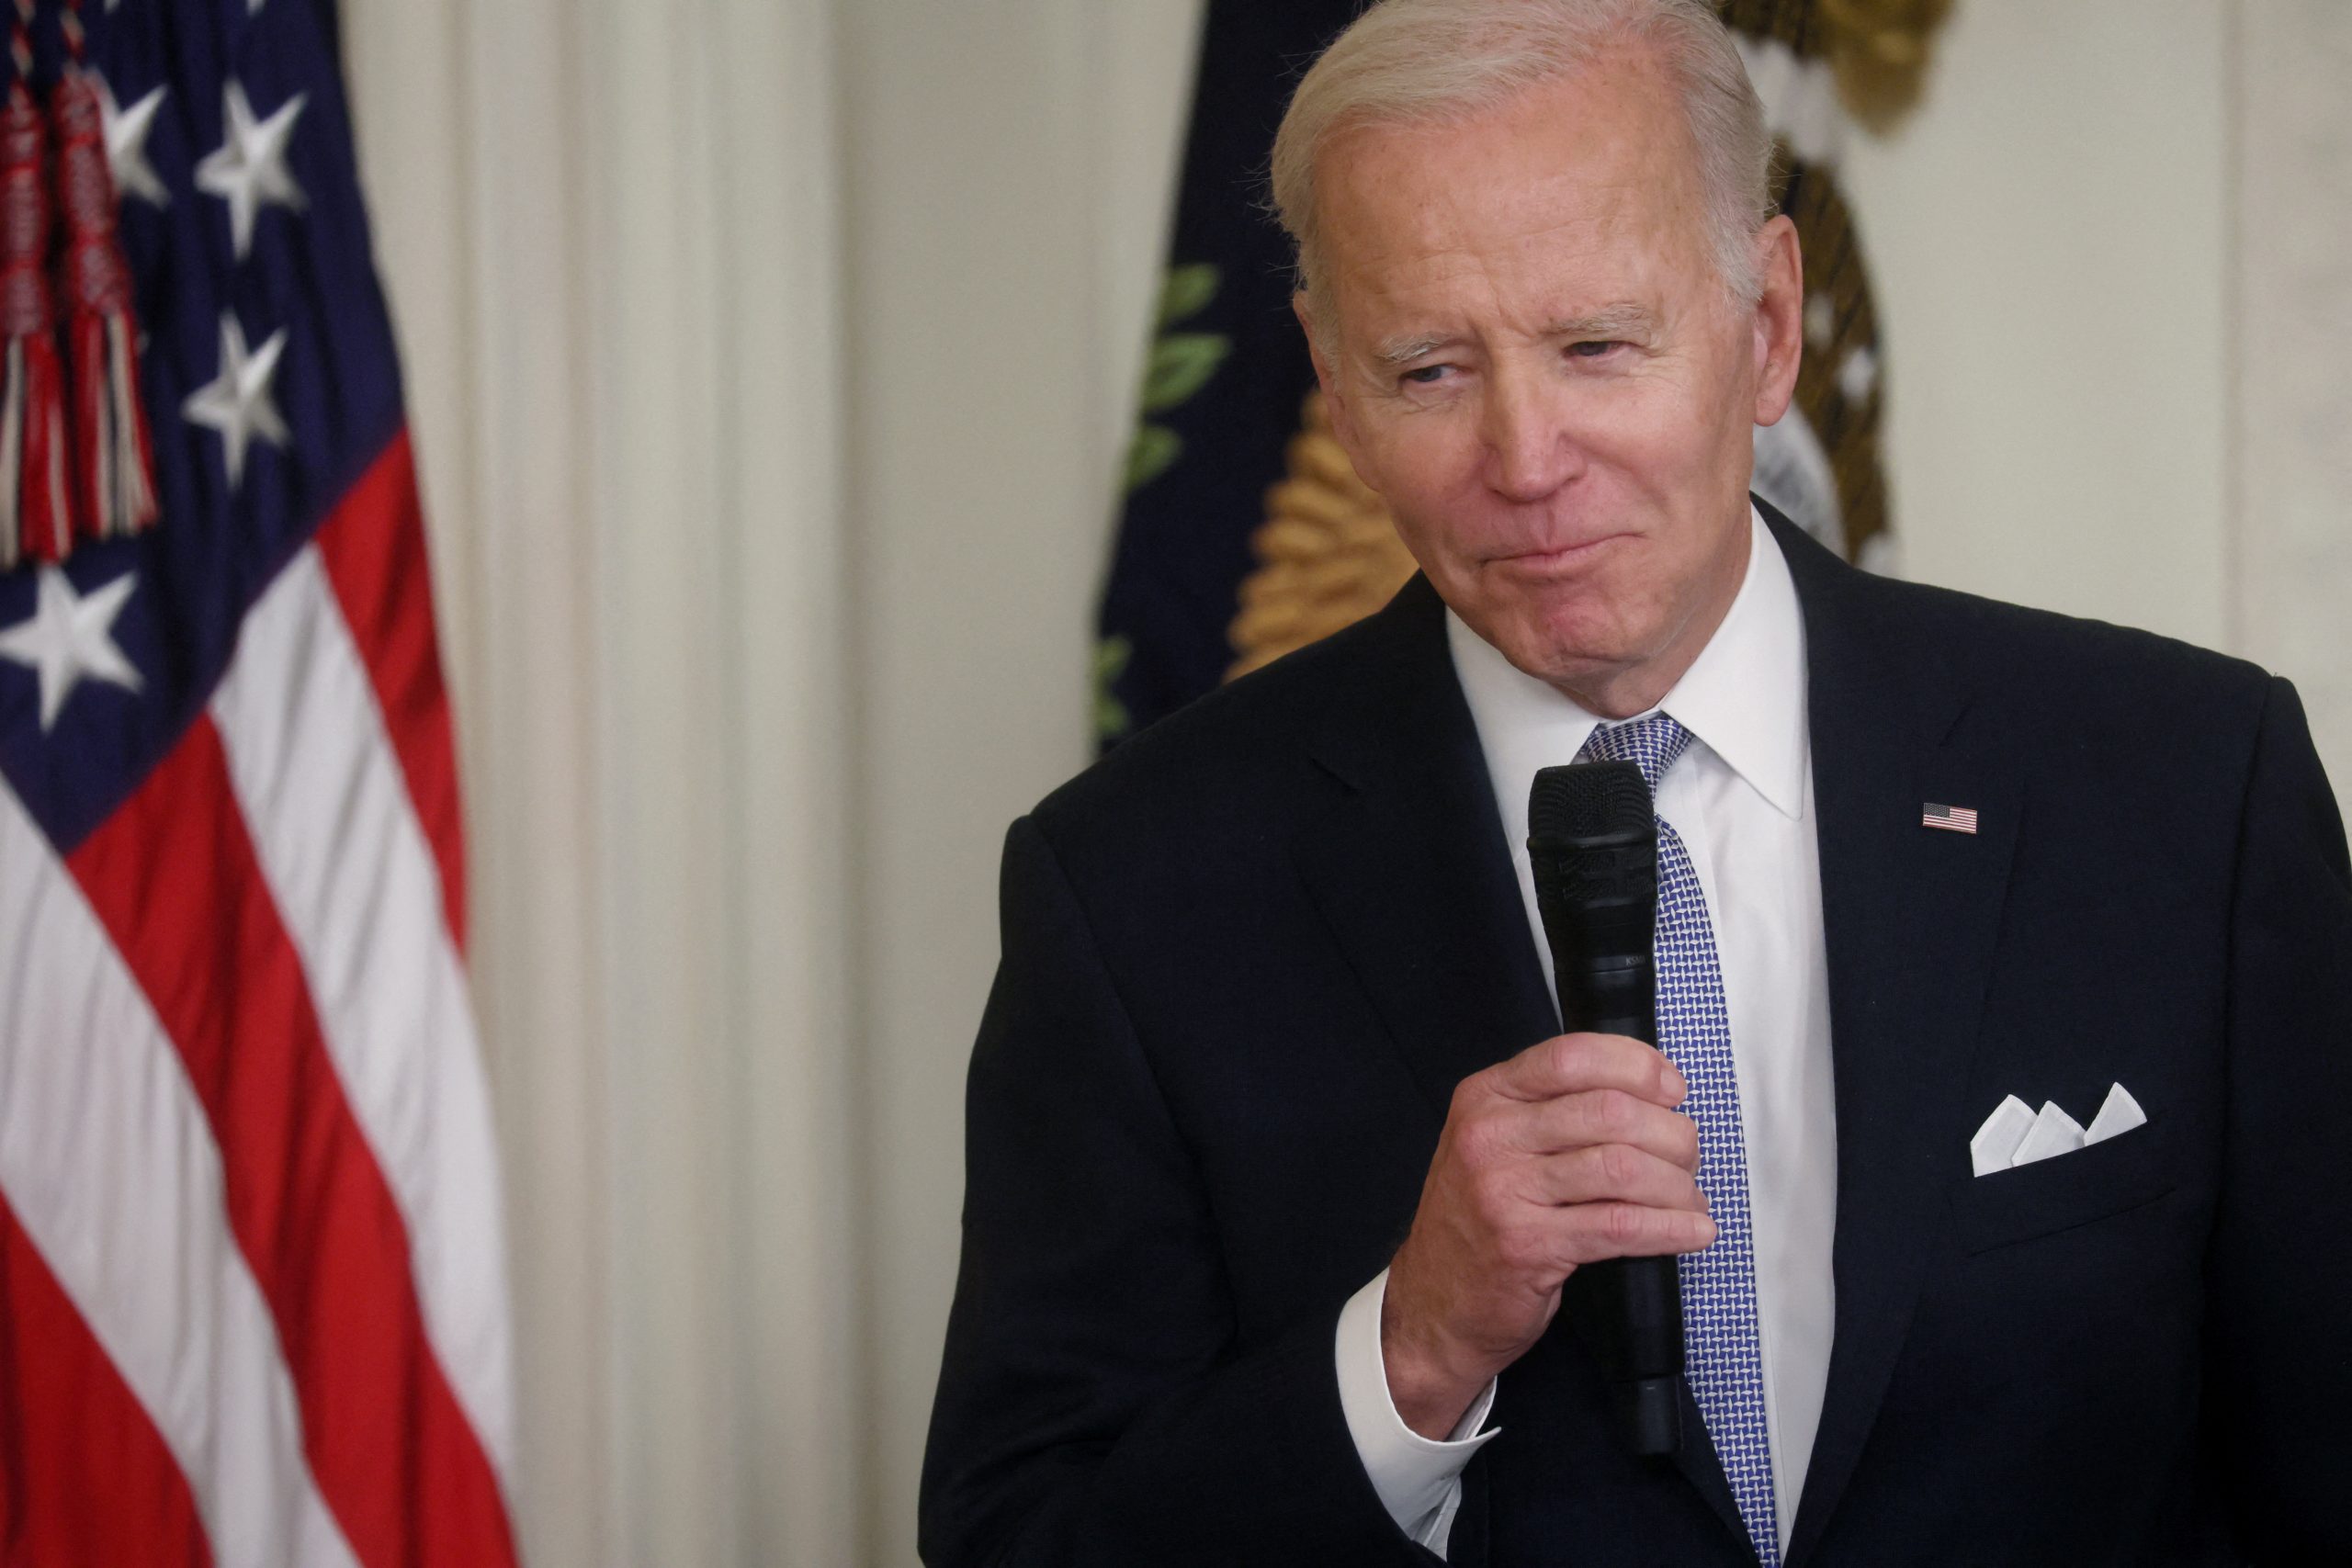 Biden’s team prepared him for questions about shunning his granddaughter, but none were asked.